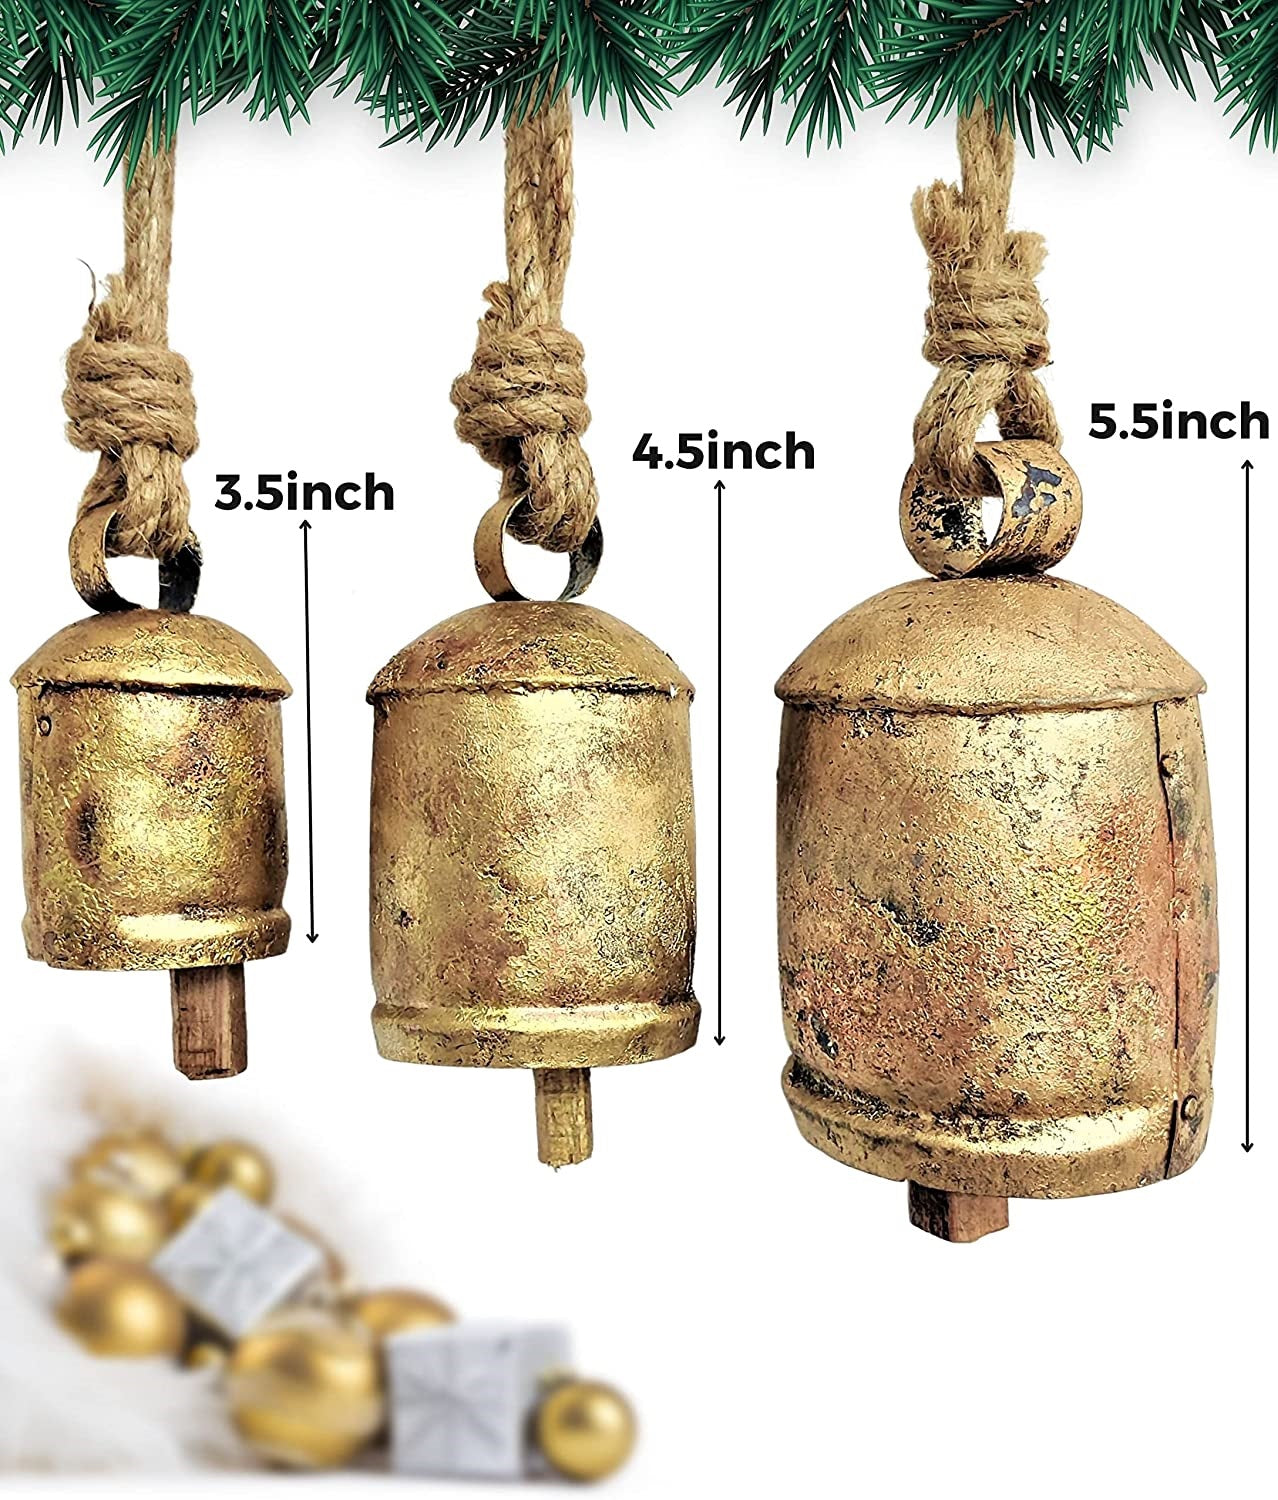 Set of 3 Harmony Cow Bells Vintage Handmade Rustic Lucky Christmas Hanging Bells On Rope